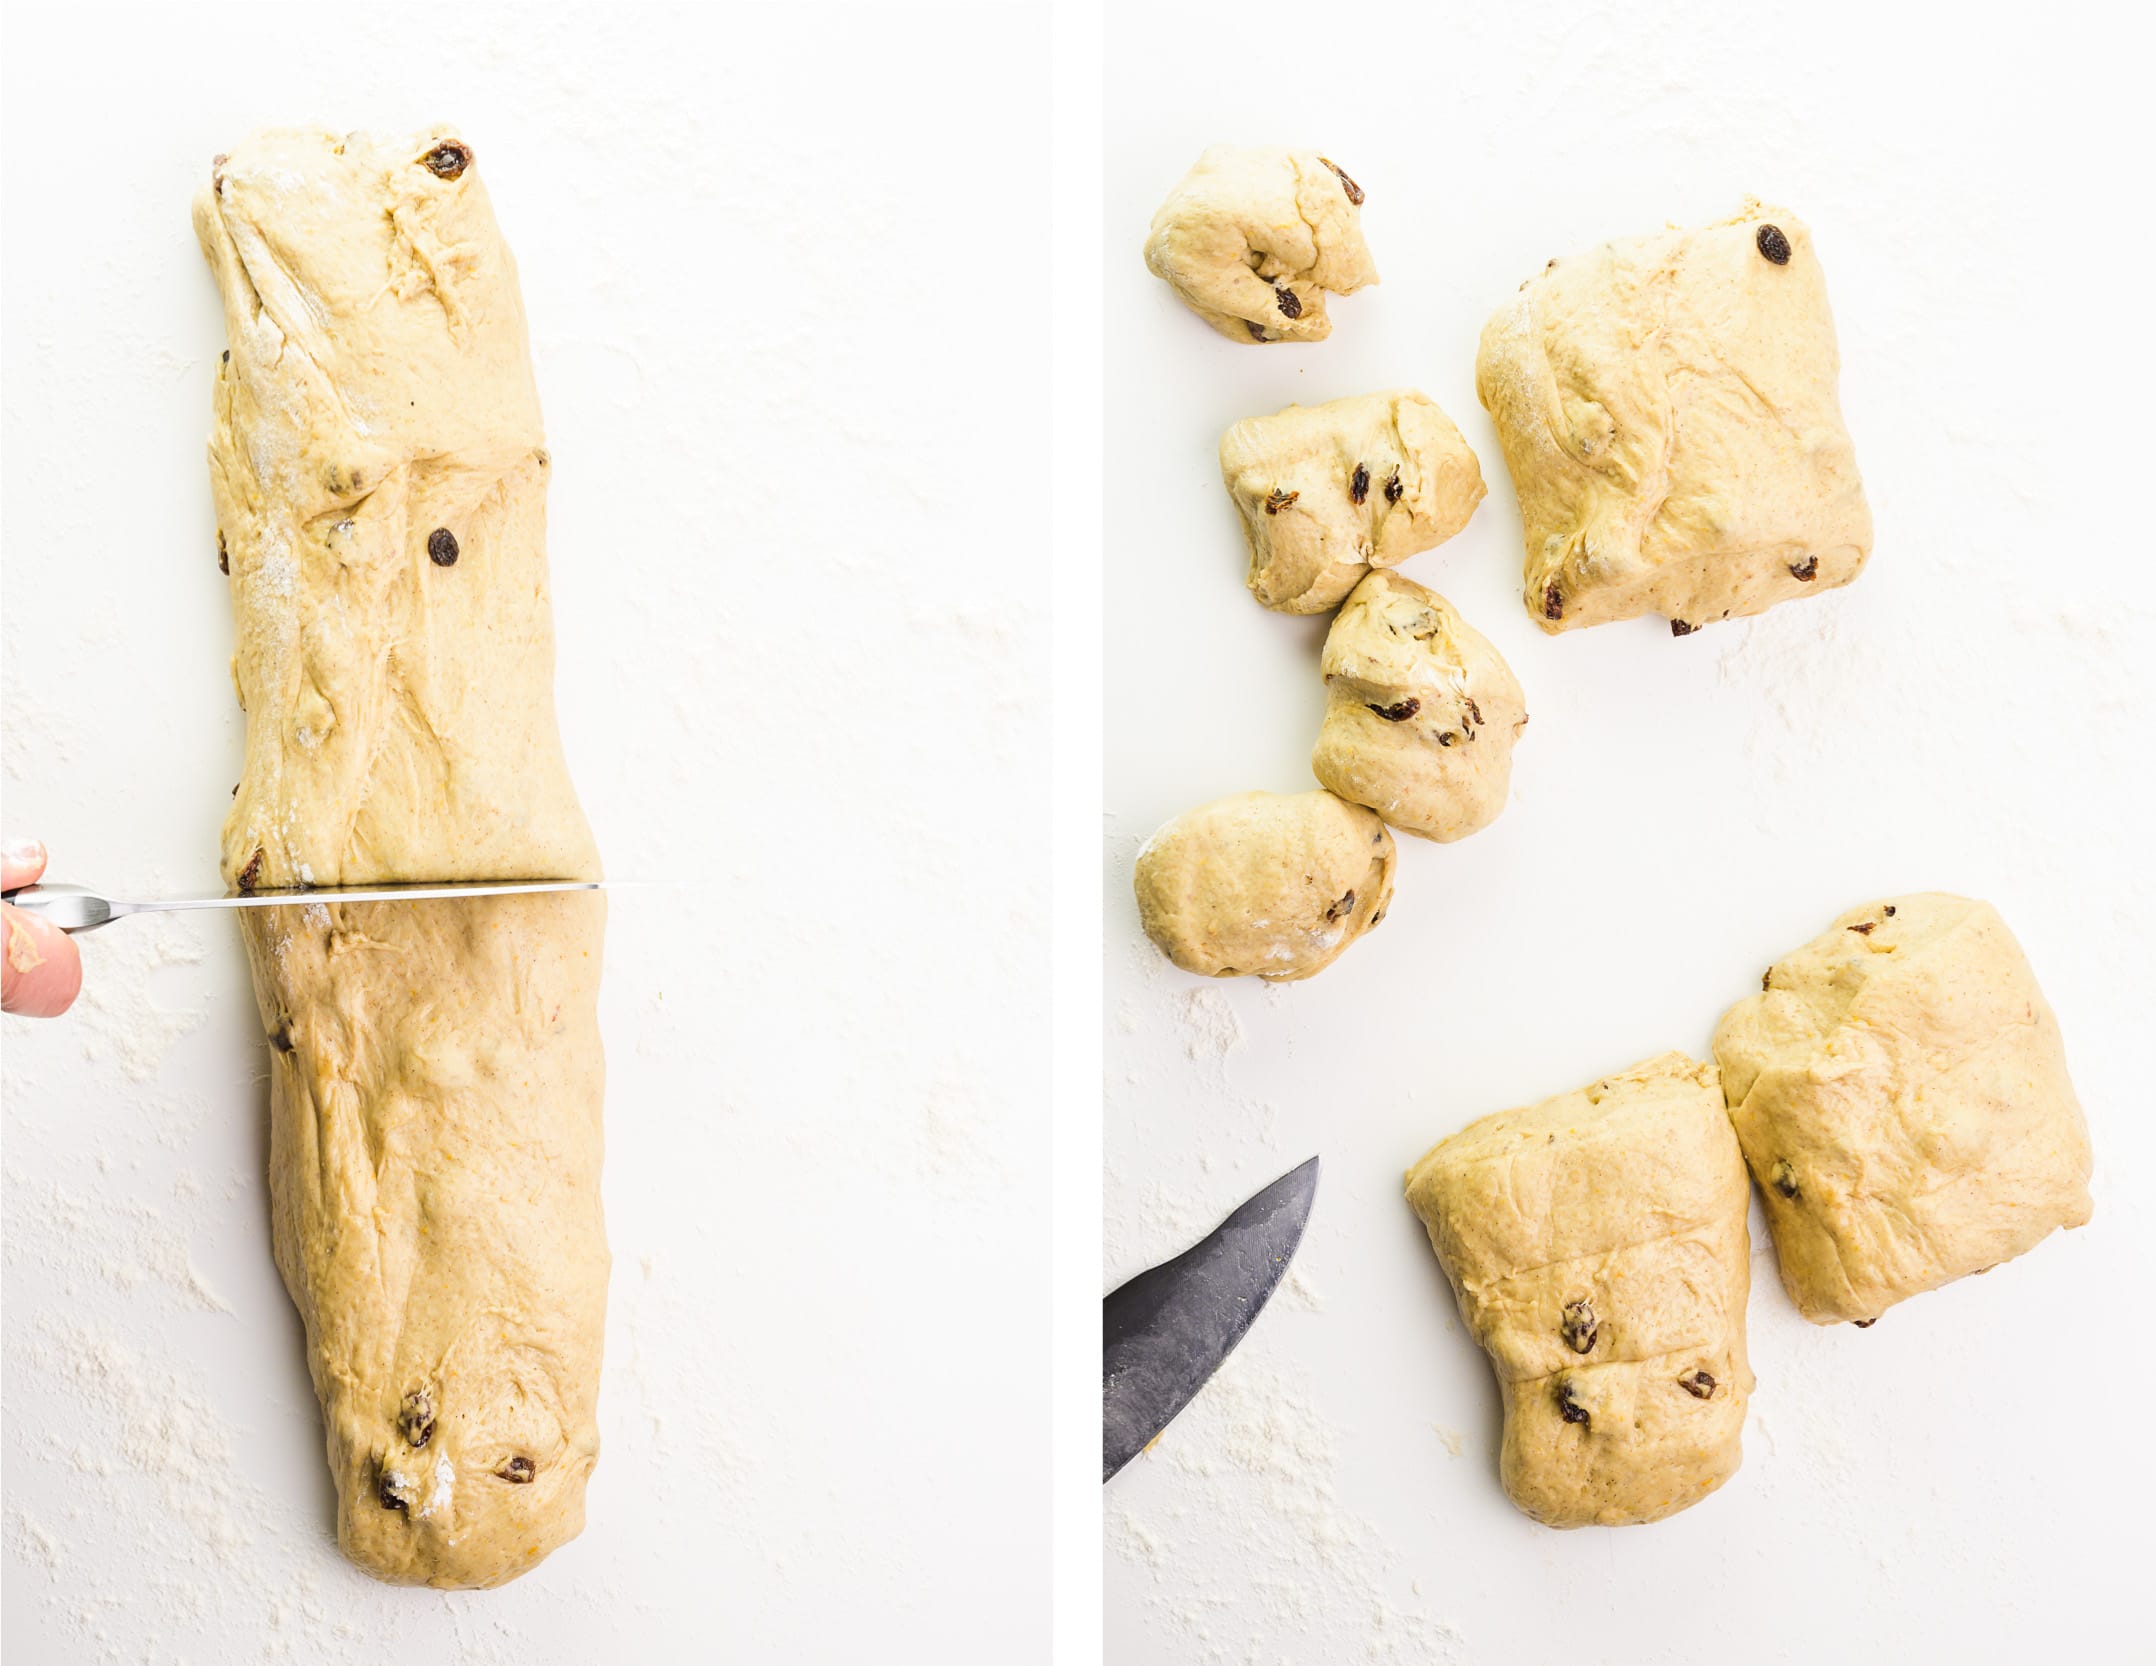 A collage of two images shows cutting a log in half on the left and the dough cut into smaller pieces on the right.